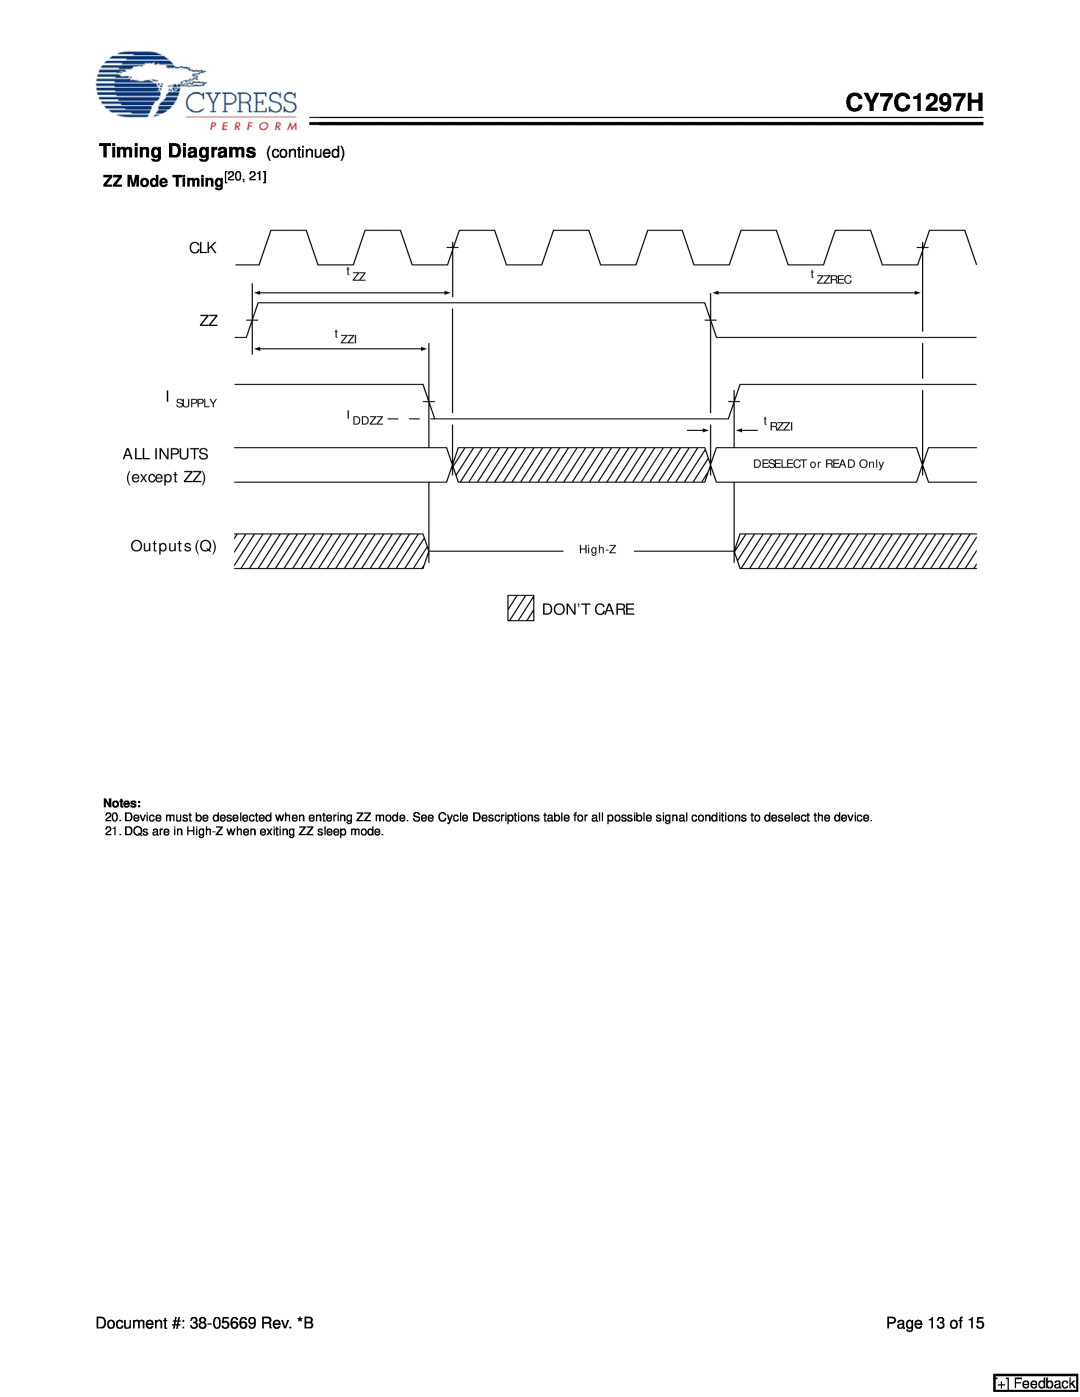 Cypress CY7C1297H manual Timing Diagrams continued, ZZ Mode Timing20, Page 13 of, + Feedback 